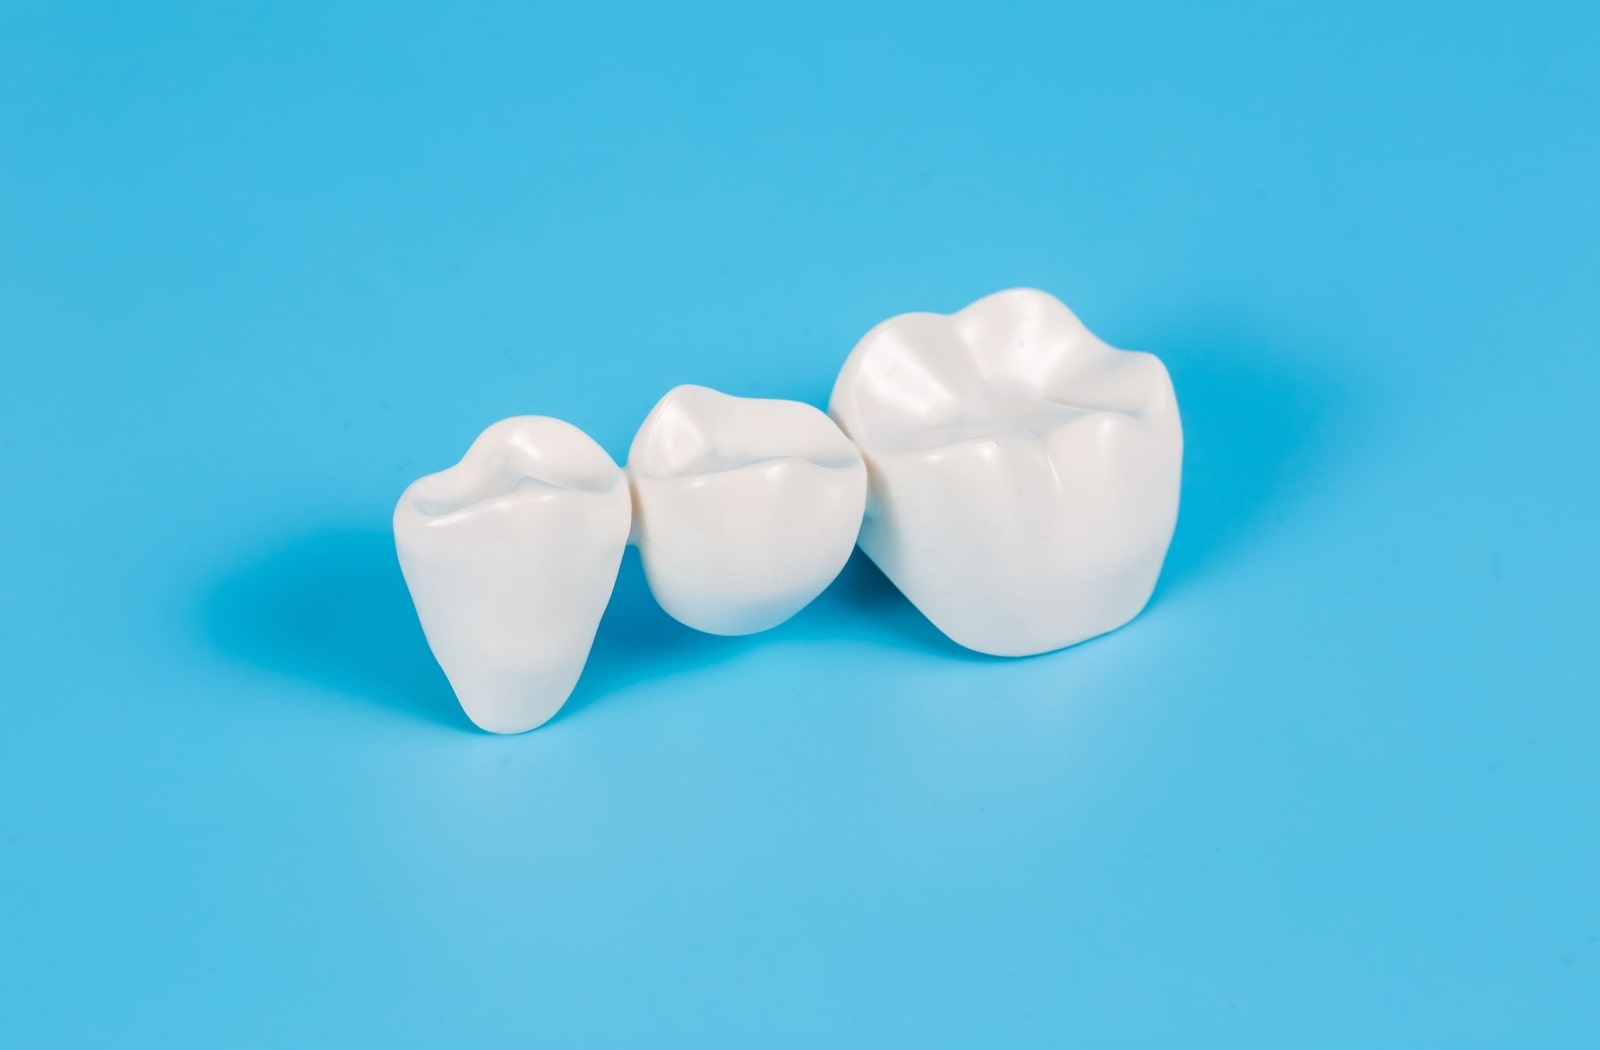 A close-up of a dental crown against a blue background.